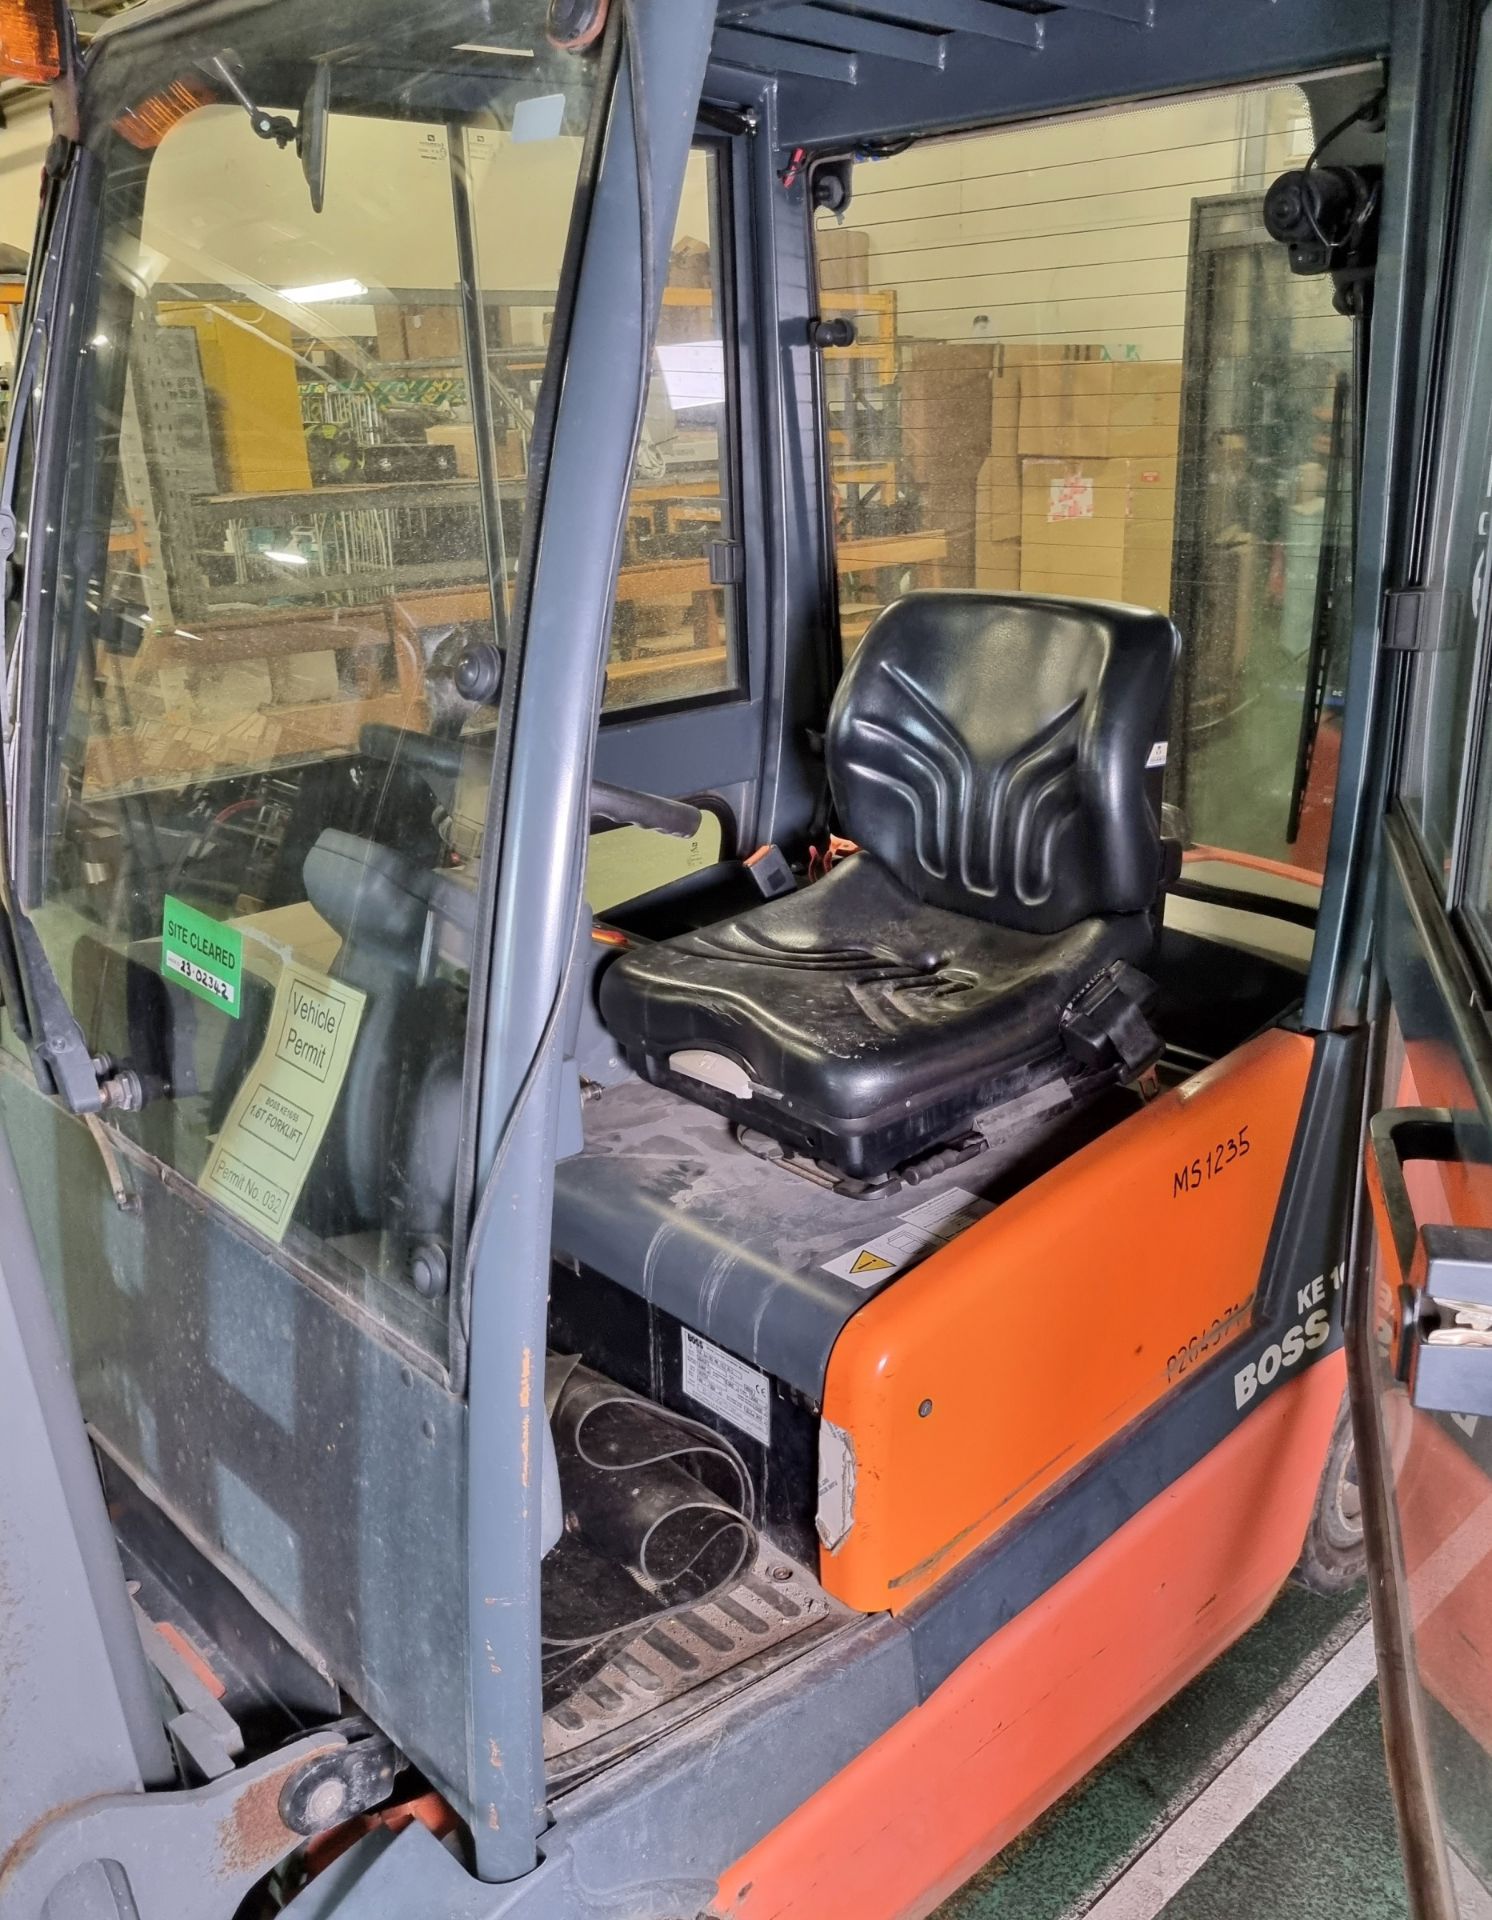 Steinbock Boss KE16 4 wheel electric forklift - L 2750 x W 1000 x H 2000mm - NEEDS NEW BATTERY - Image 13 of 24